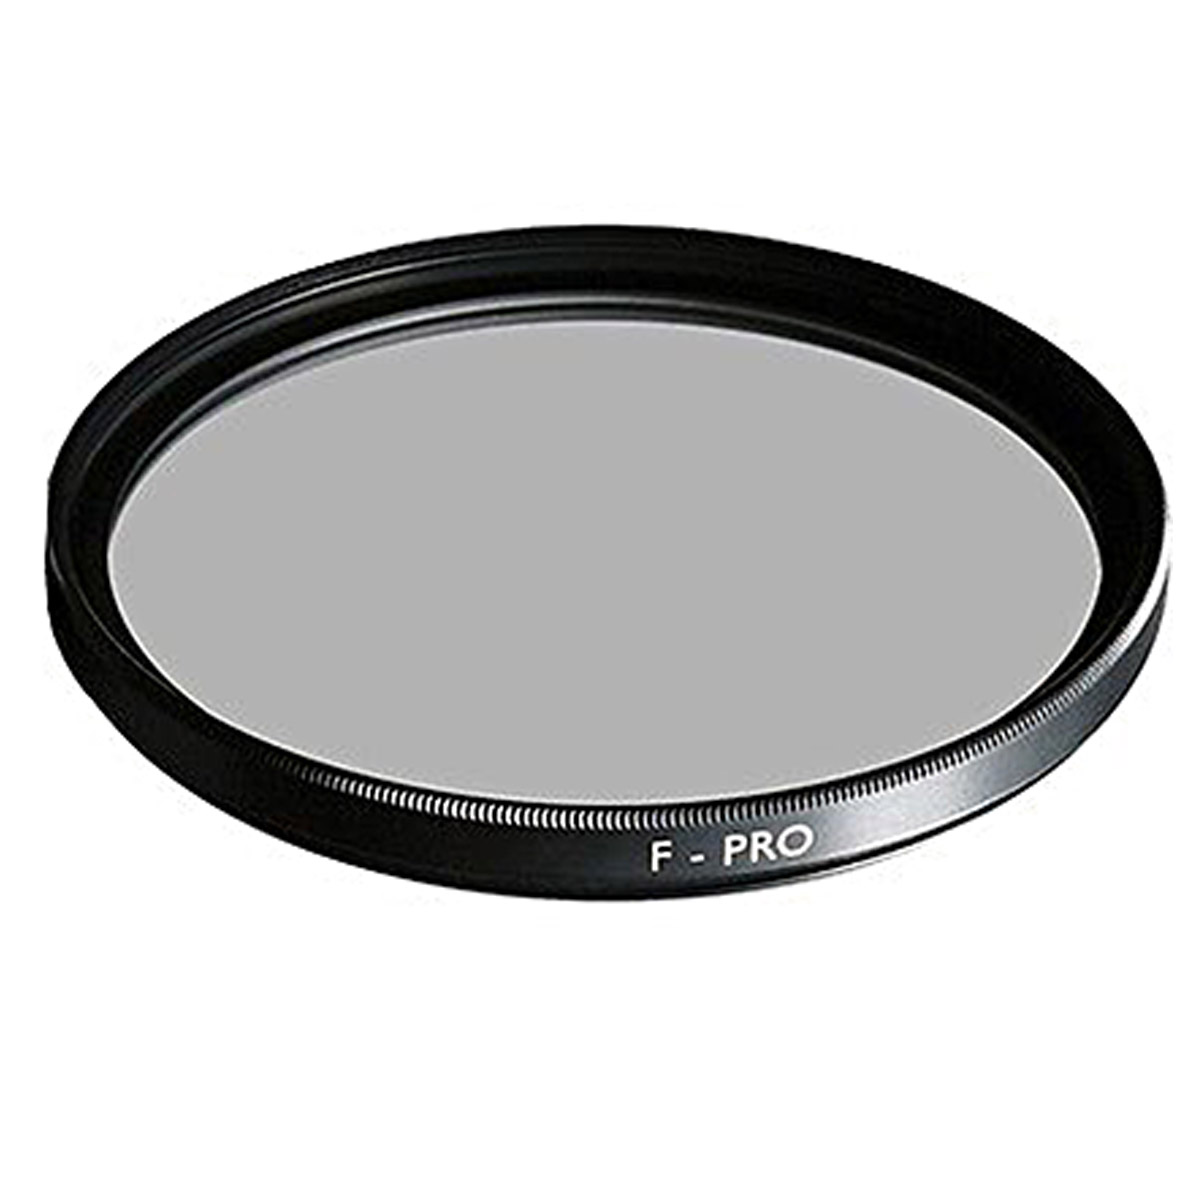 EAN 4012240455973 product image for 37mm 0.6 ND 102 Filter | upcitemdb.com